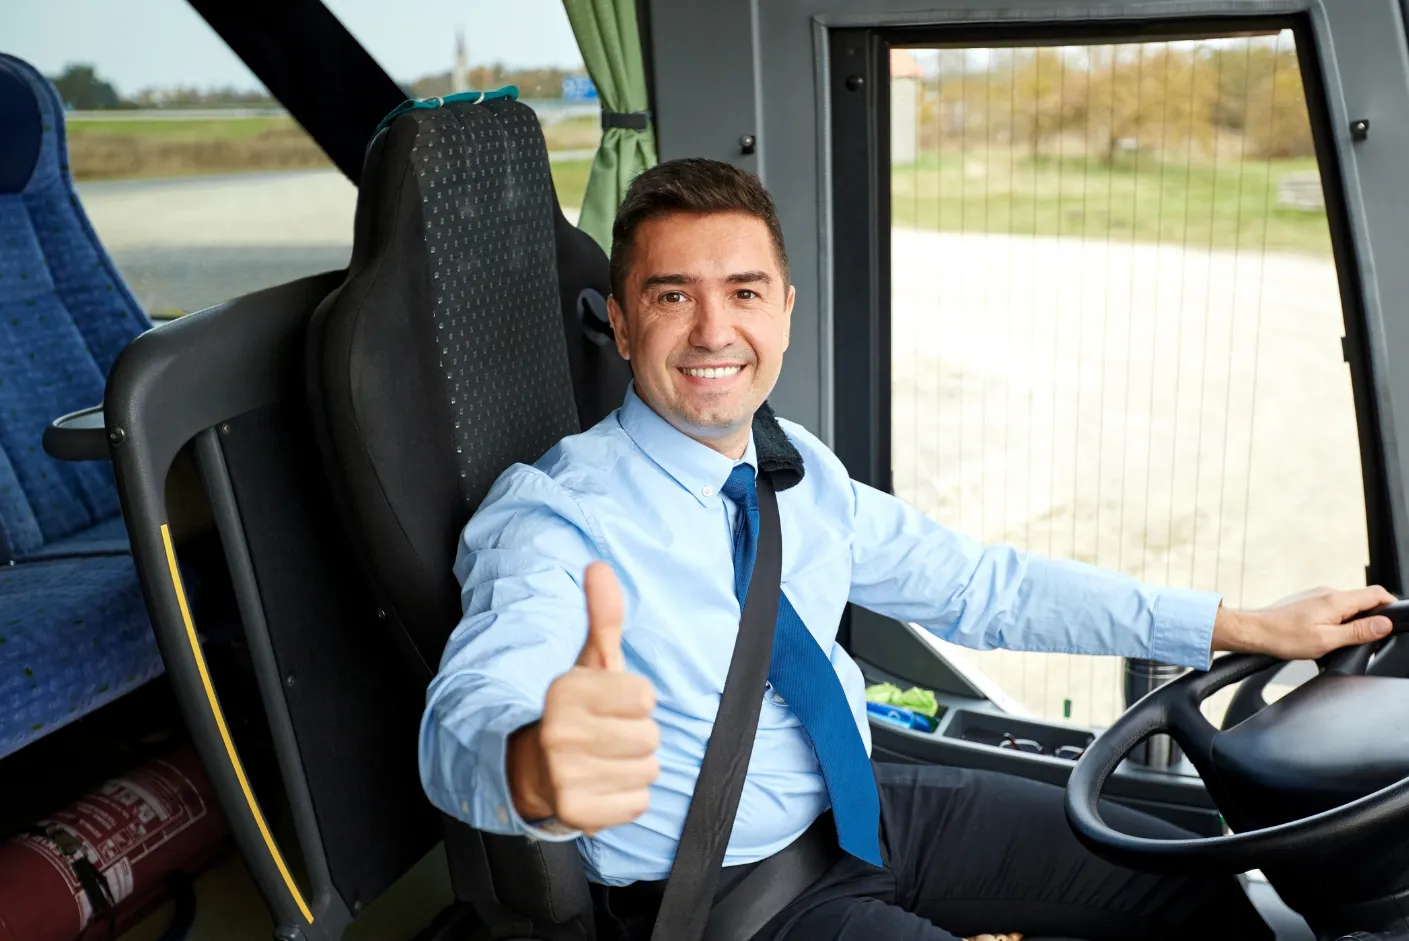 Get to know about the dmv cdl practice test in detail